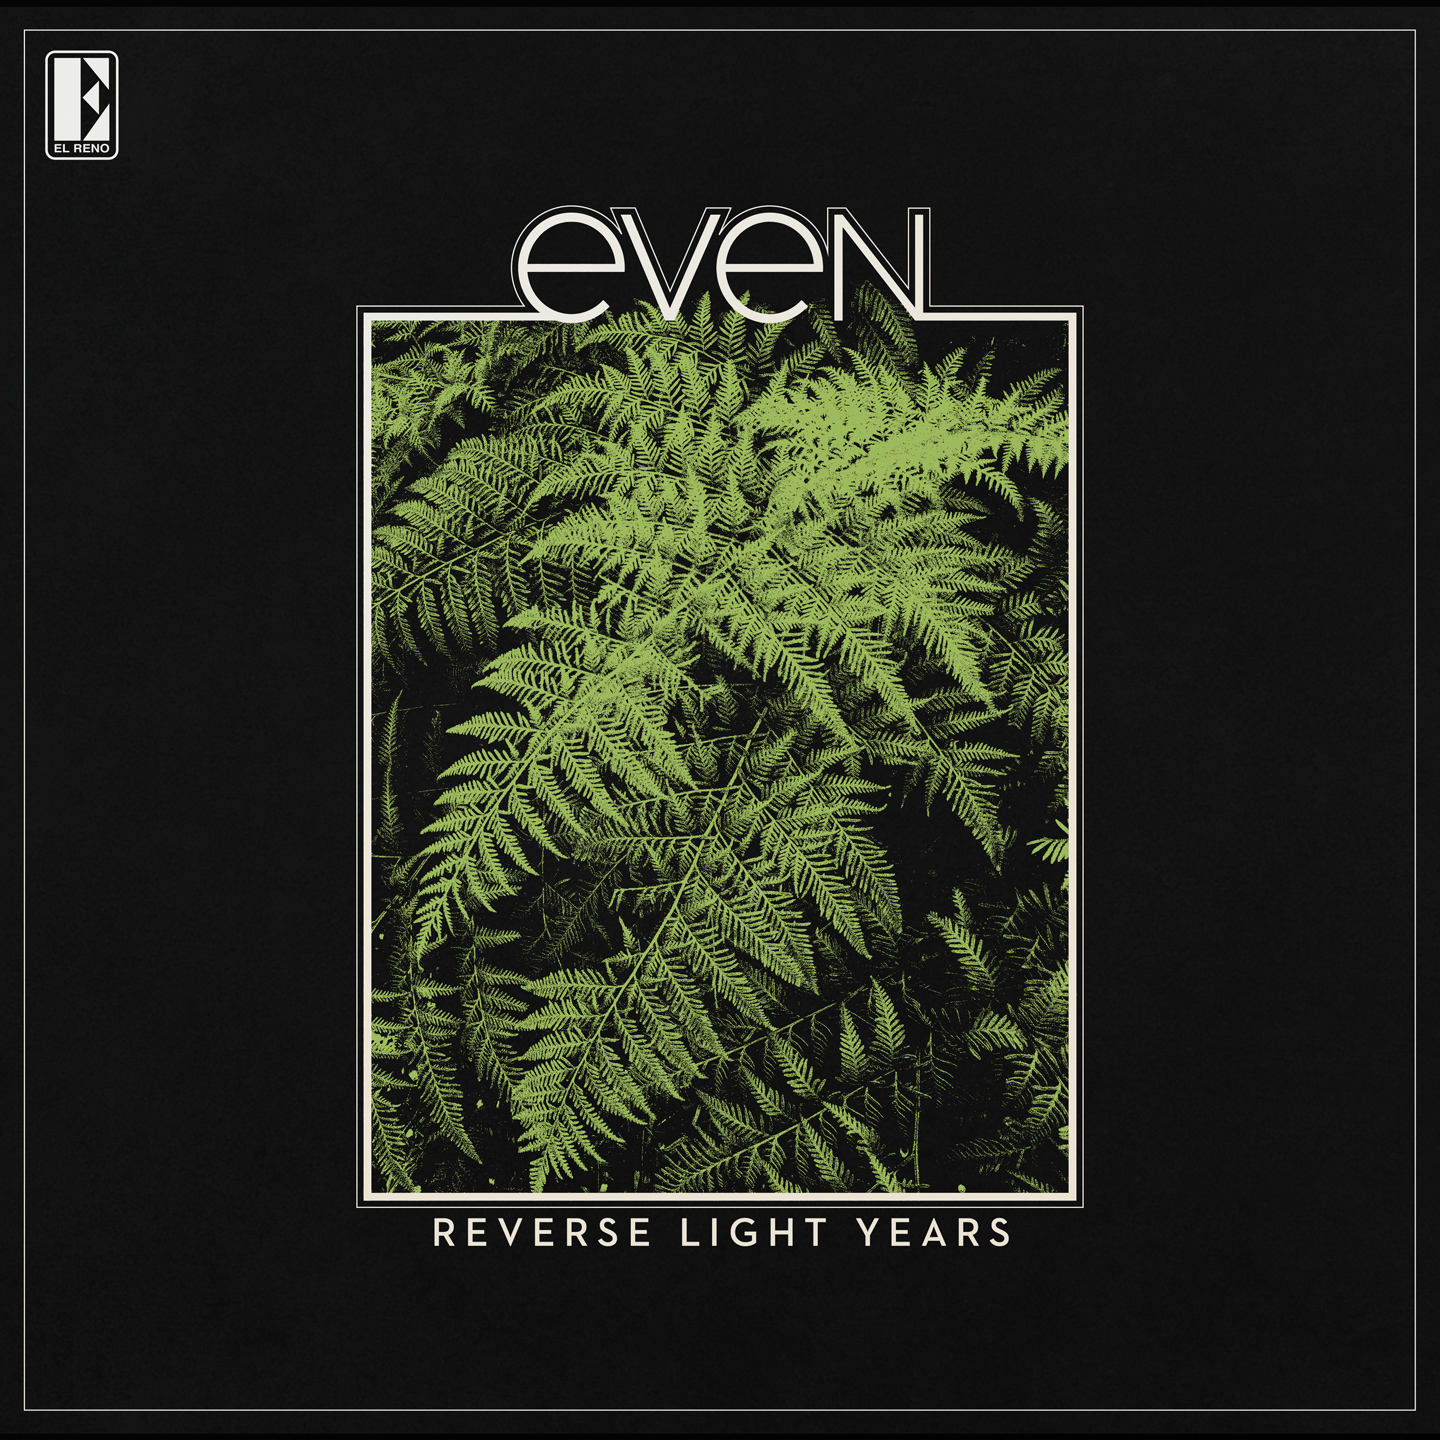 Ashley Naylor introduces the songs on first half of Even's double album Reverse Light Years 